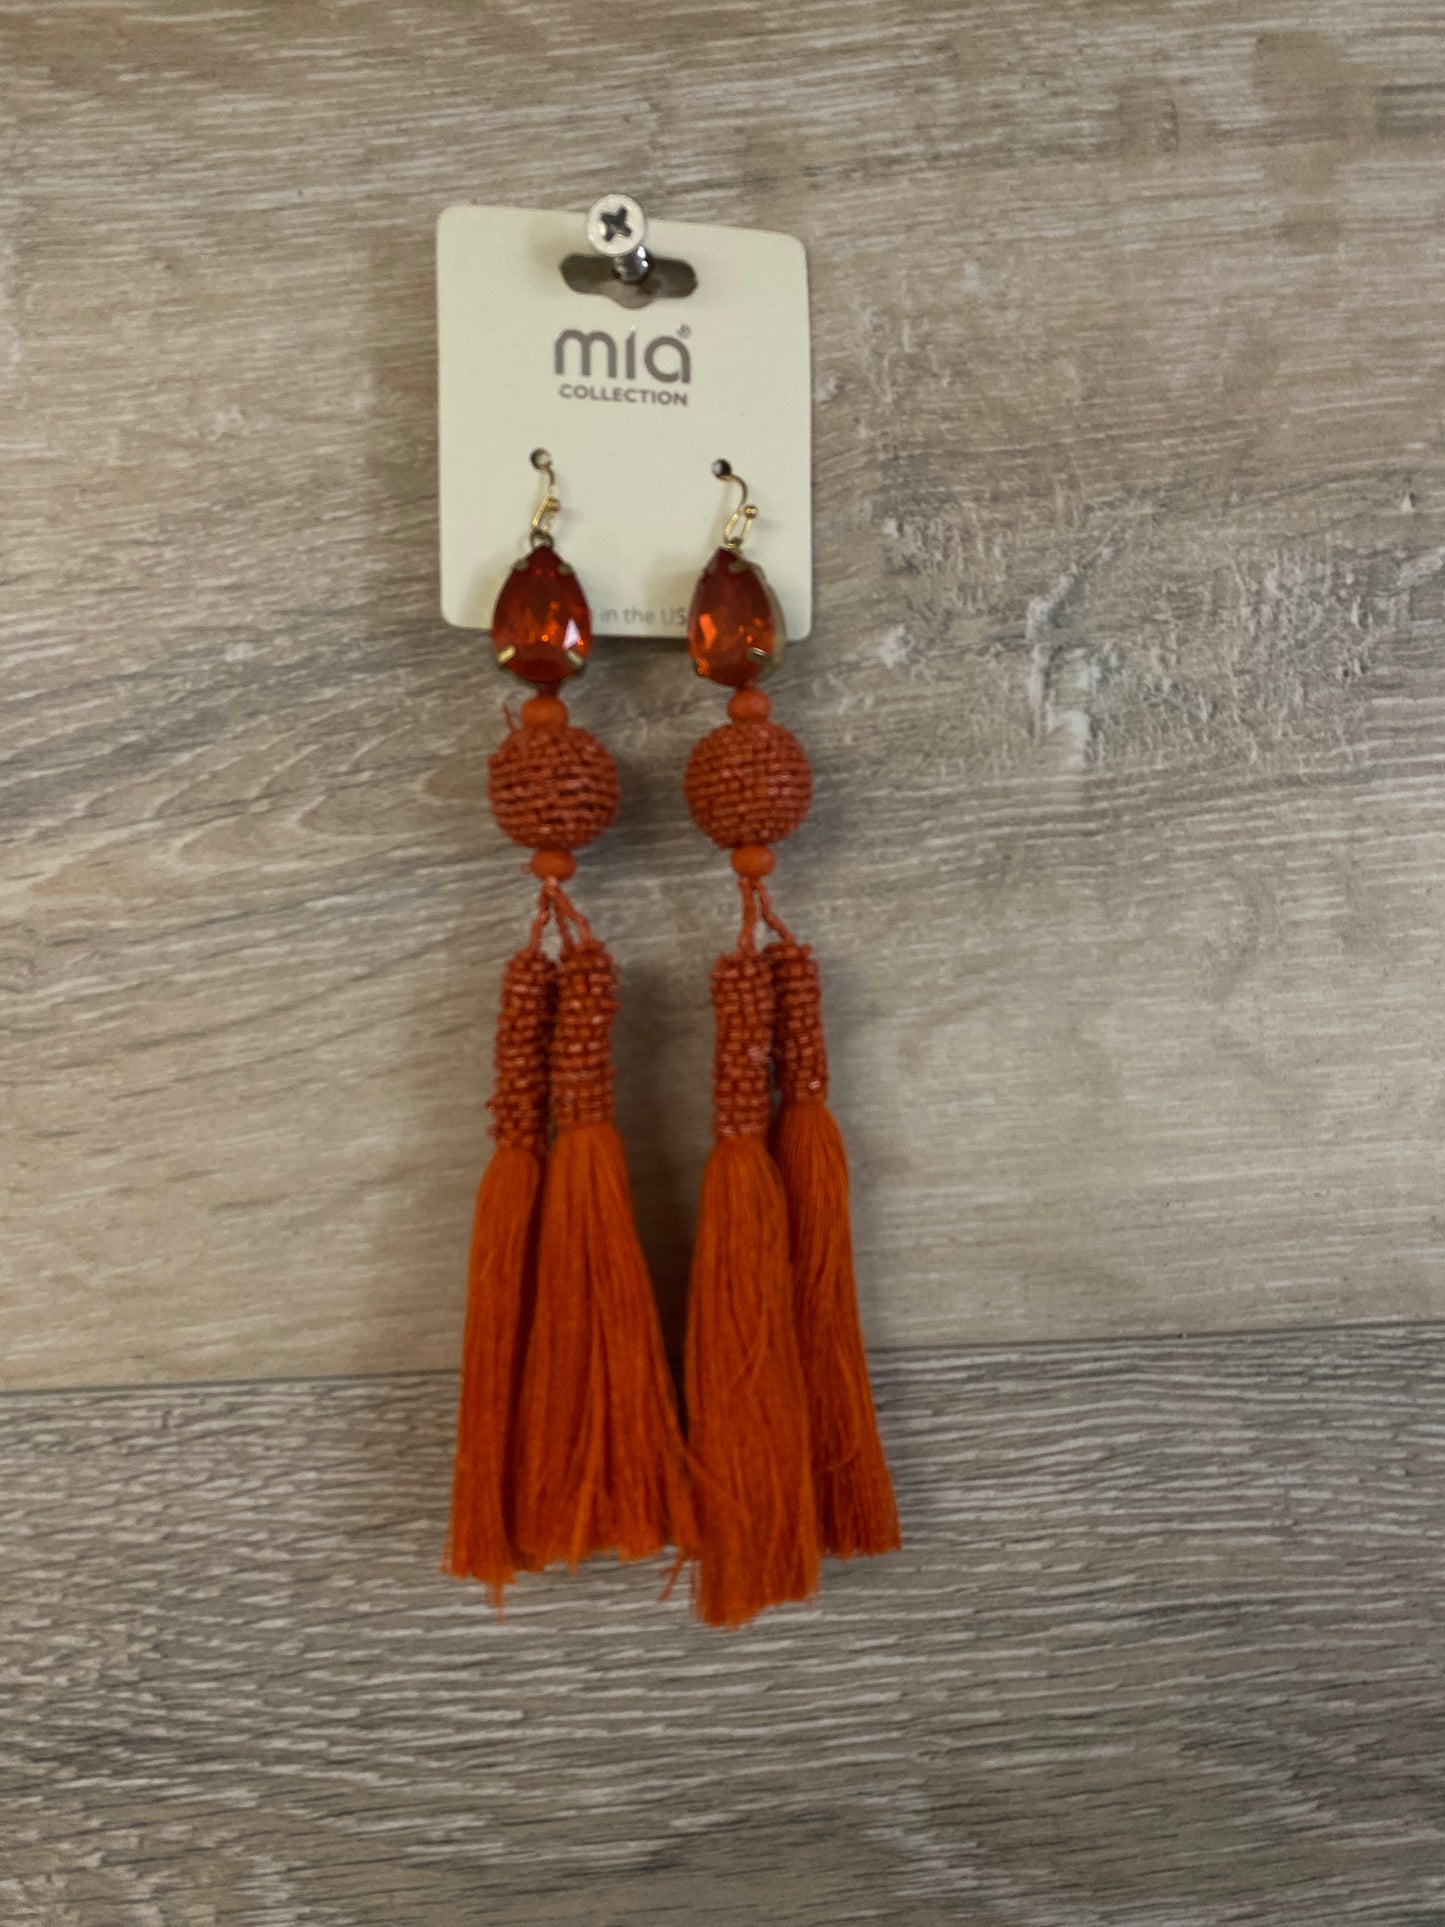 Mia Collection Earrings